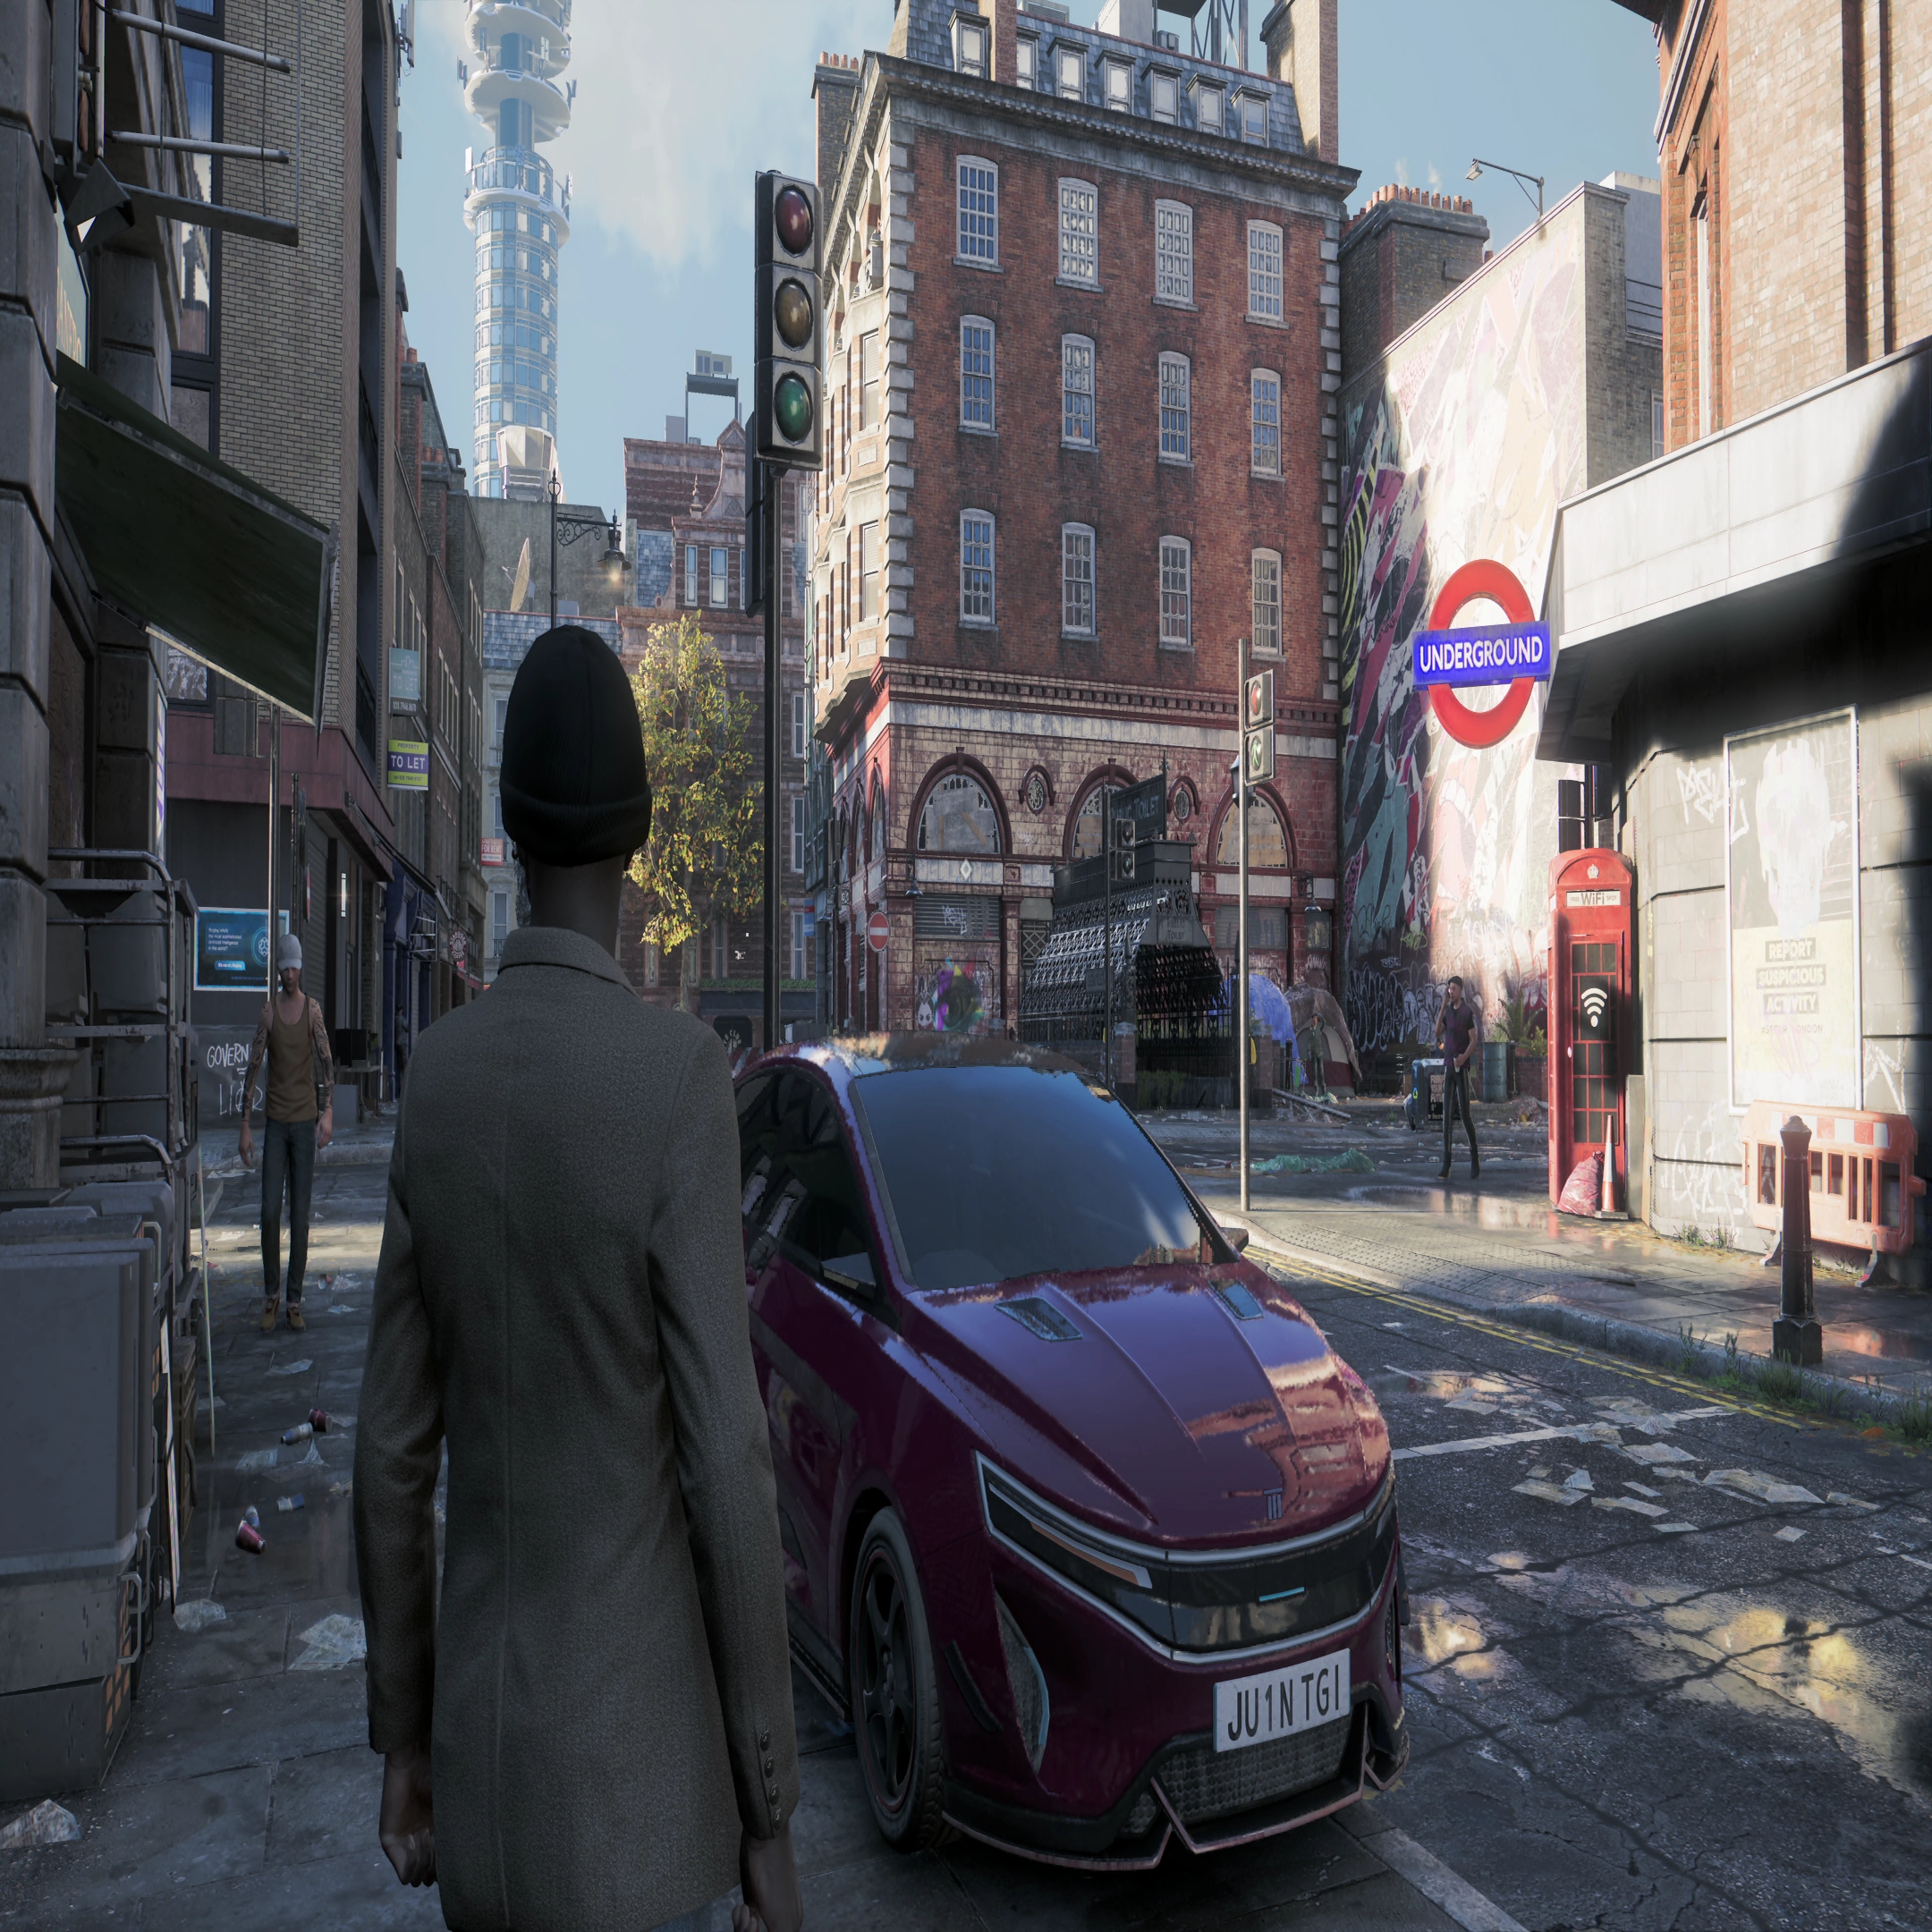 Watch Dogs Legion PC graphics and gameplay settings revealed in